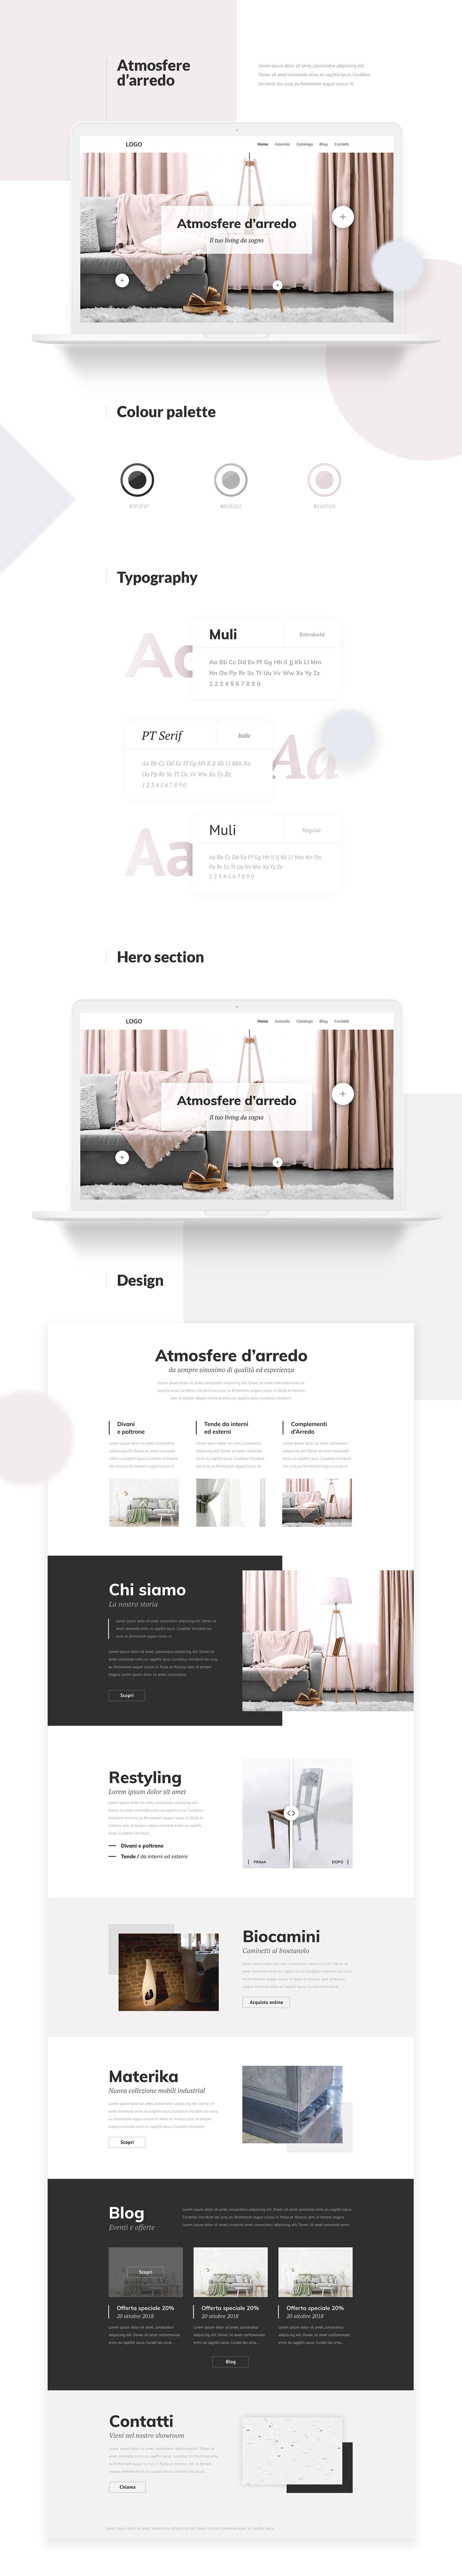 Website Pastels RESTYLING design curtains sofas UI ux forniture Web